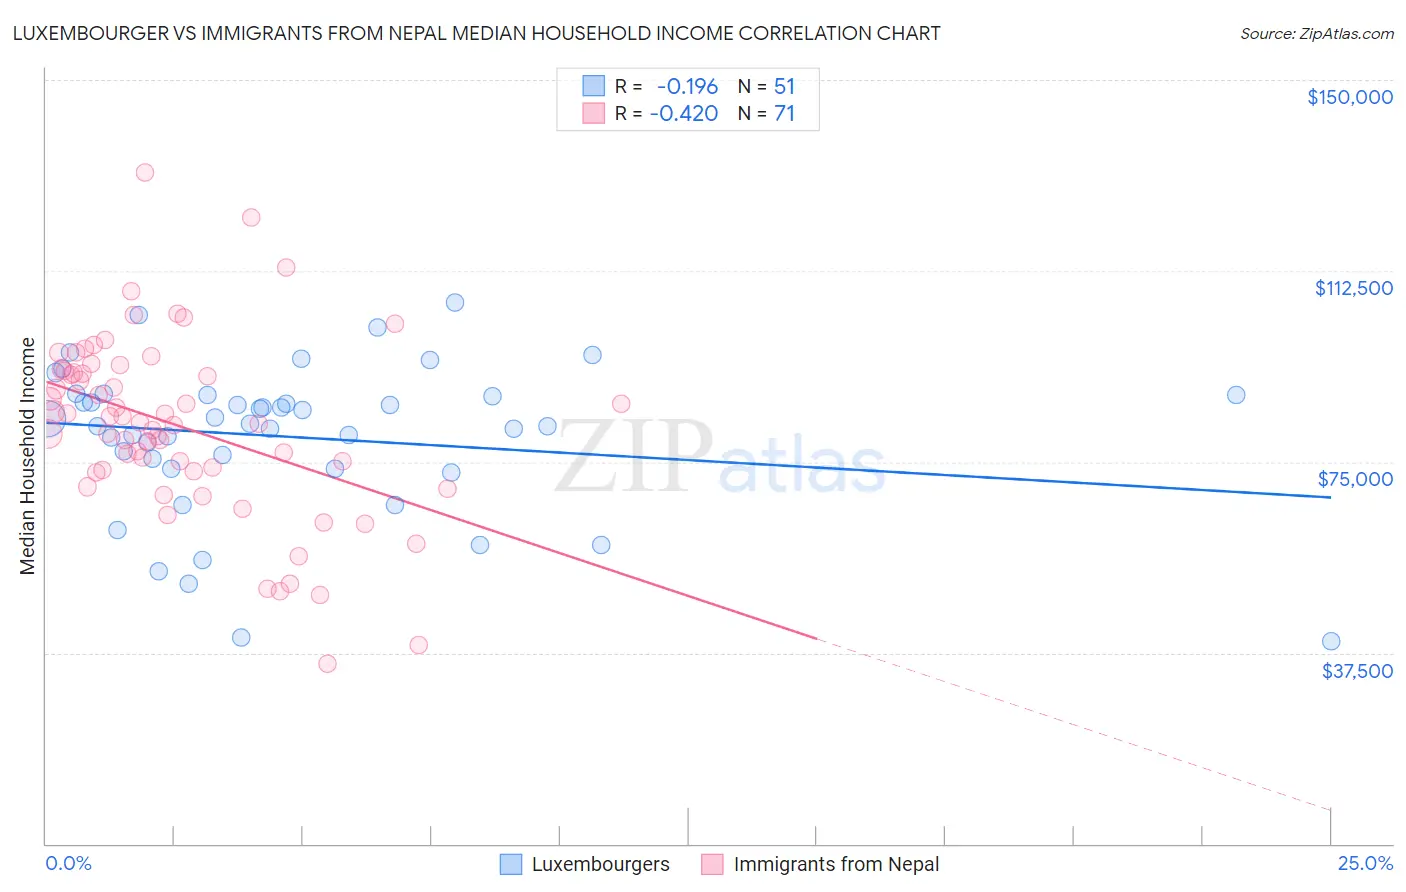 Luxembourger vs Immigrants from Nepal Median Household Income